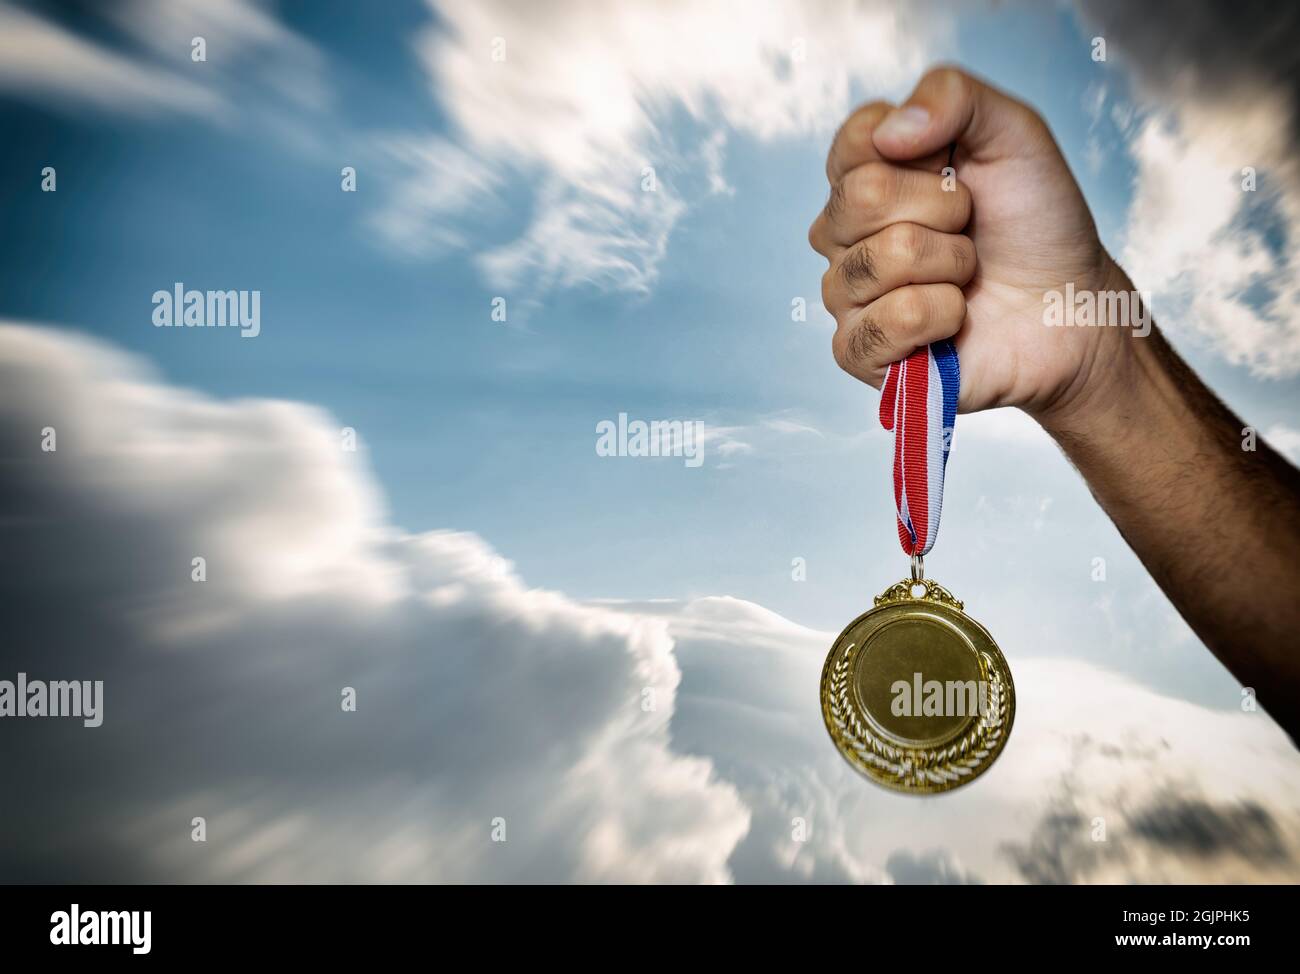 Golden Medal - First Place Sport Champion Stock Photo, Picture and